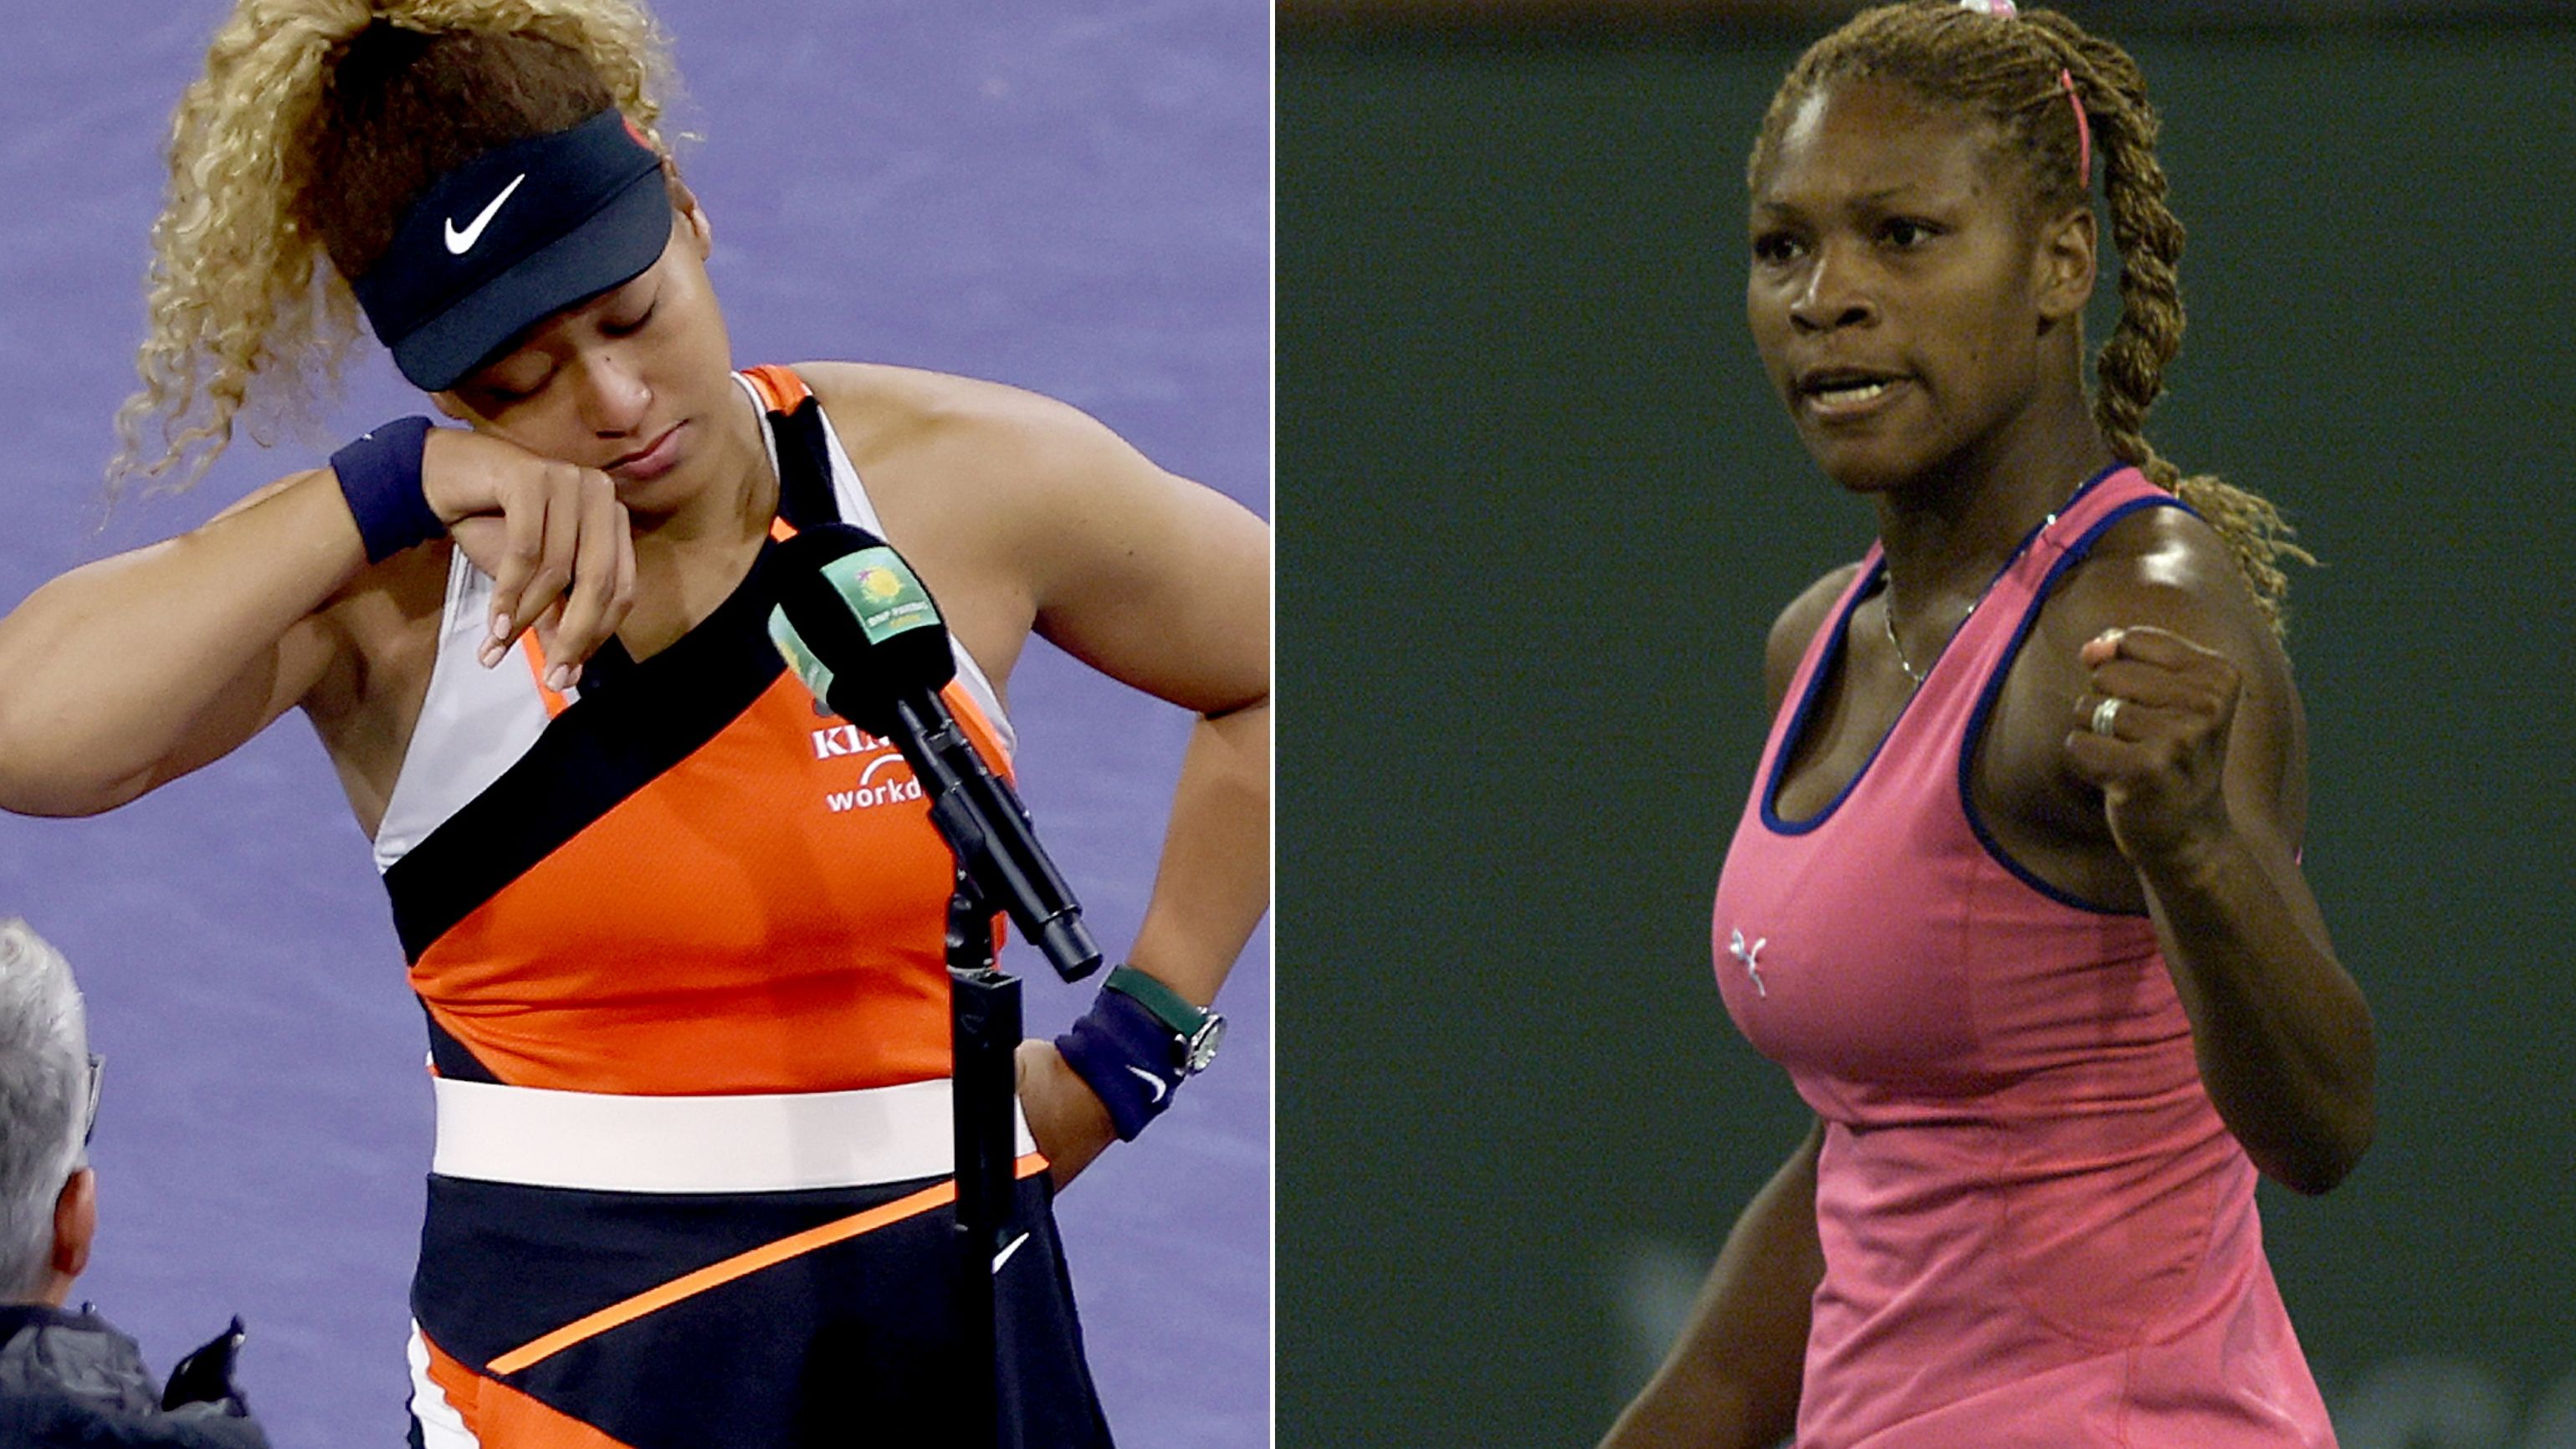 The 2001 Serena Williams incident which brought Naomi Osaka to tears at Indian Wells